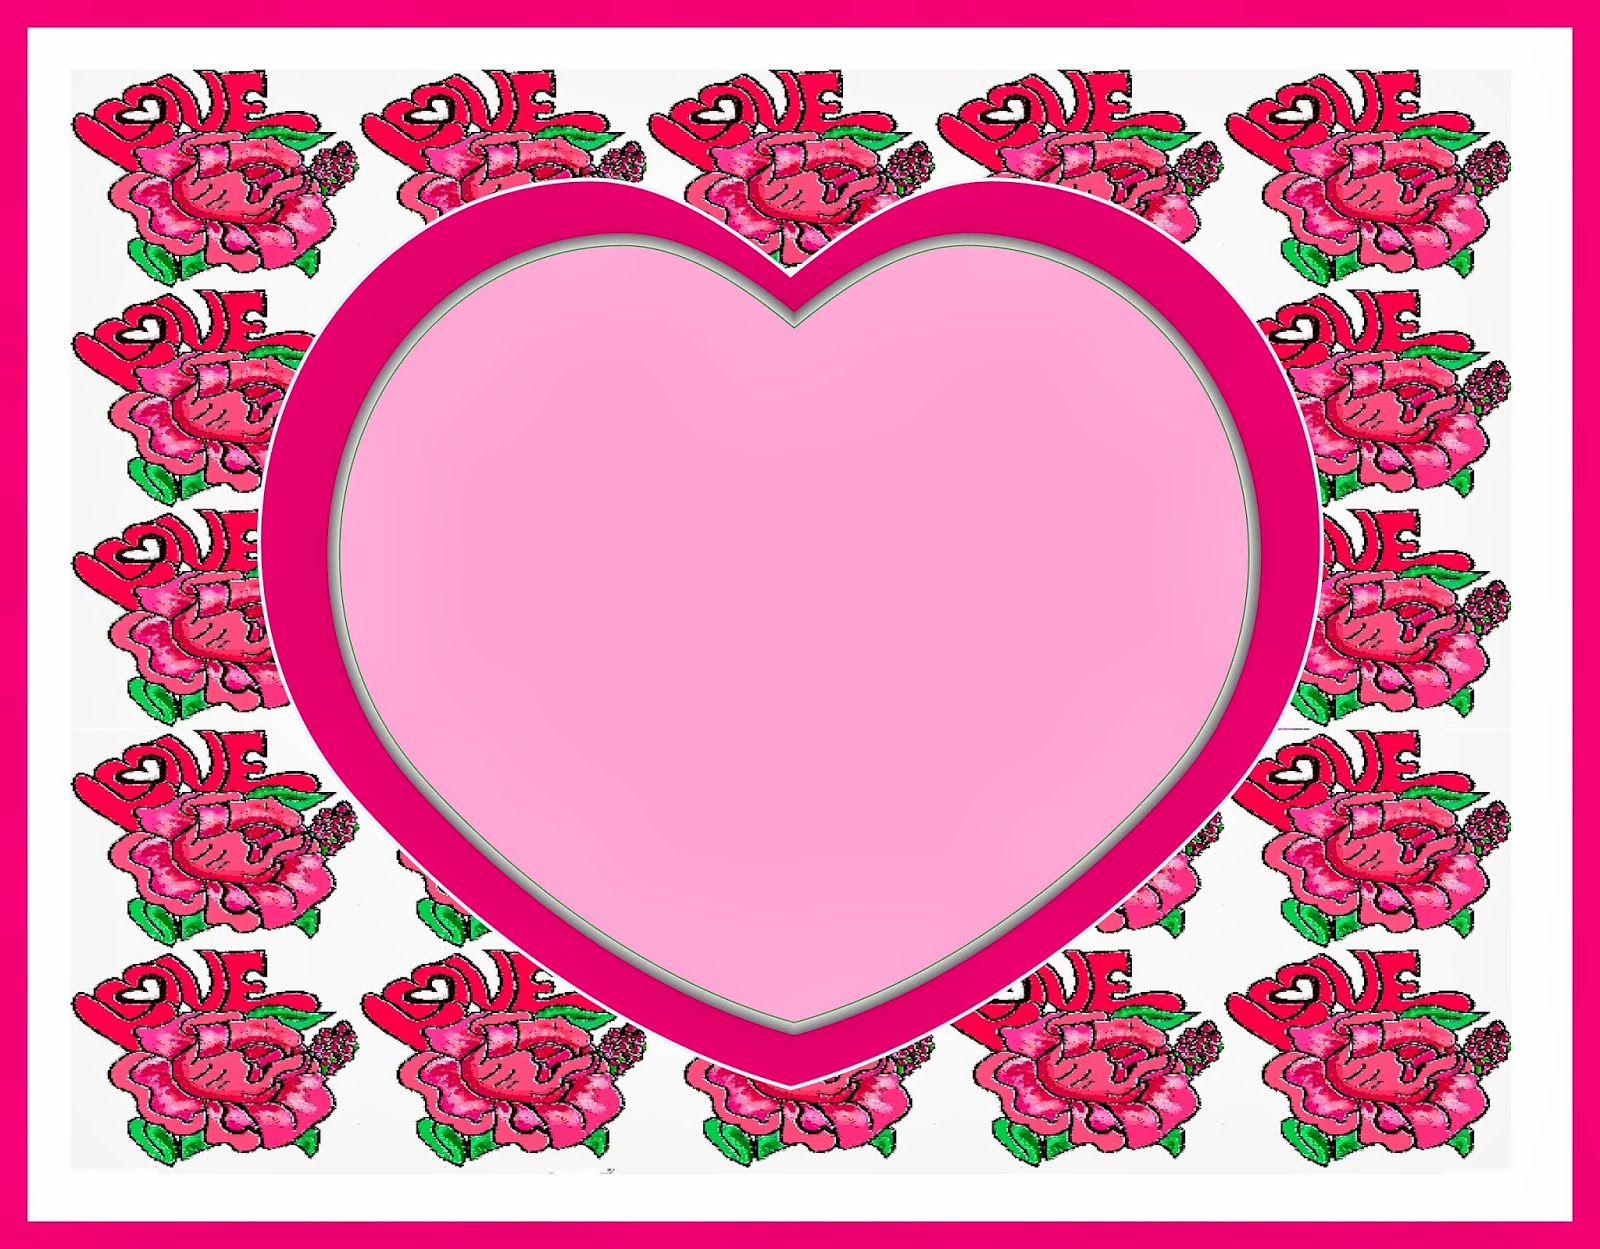 Christian Images In My Treasure Box: Rose Heart Borders And Frames